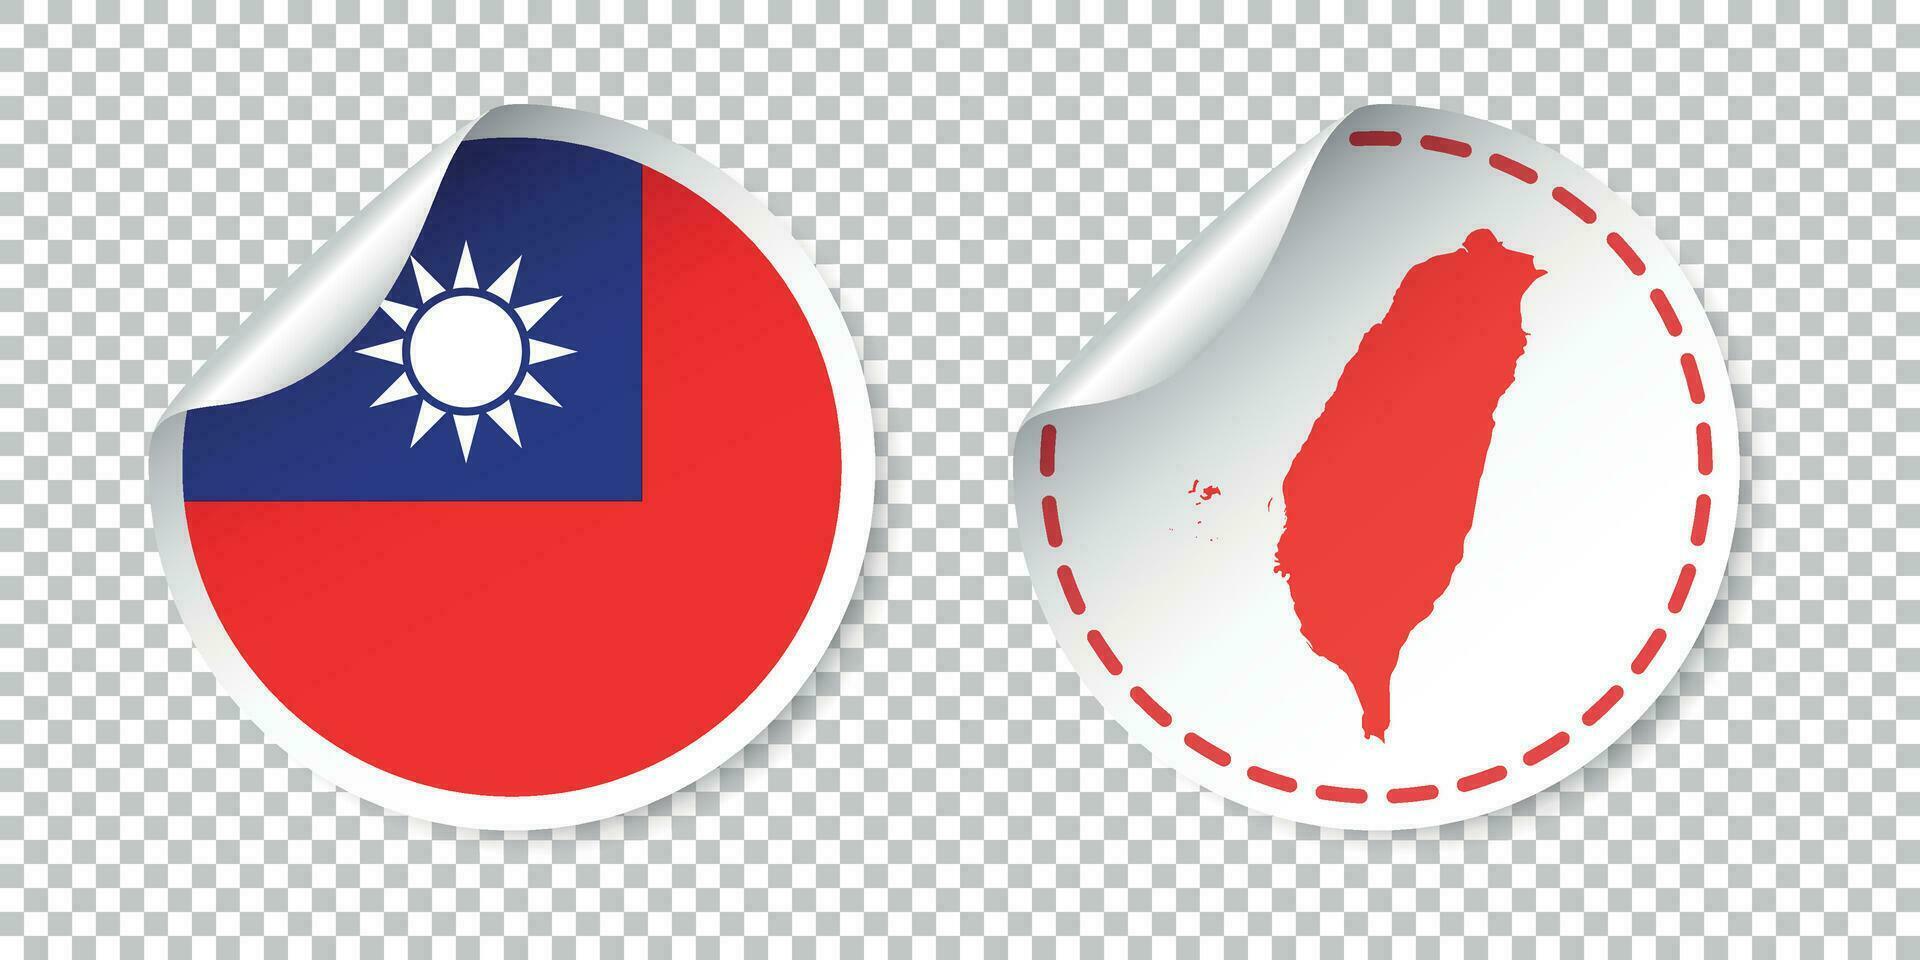 Taiwan sticker with flag and map. Label, round tag with country. Vector illustration on isolated background.